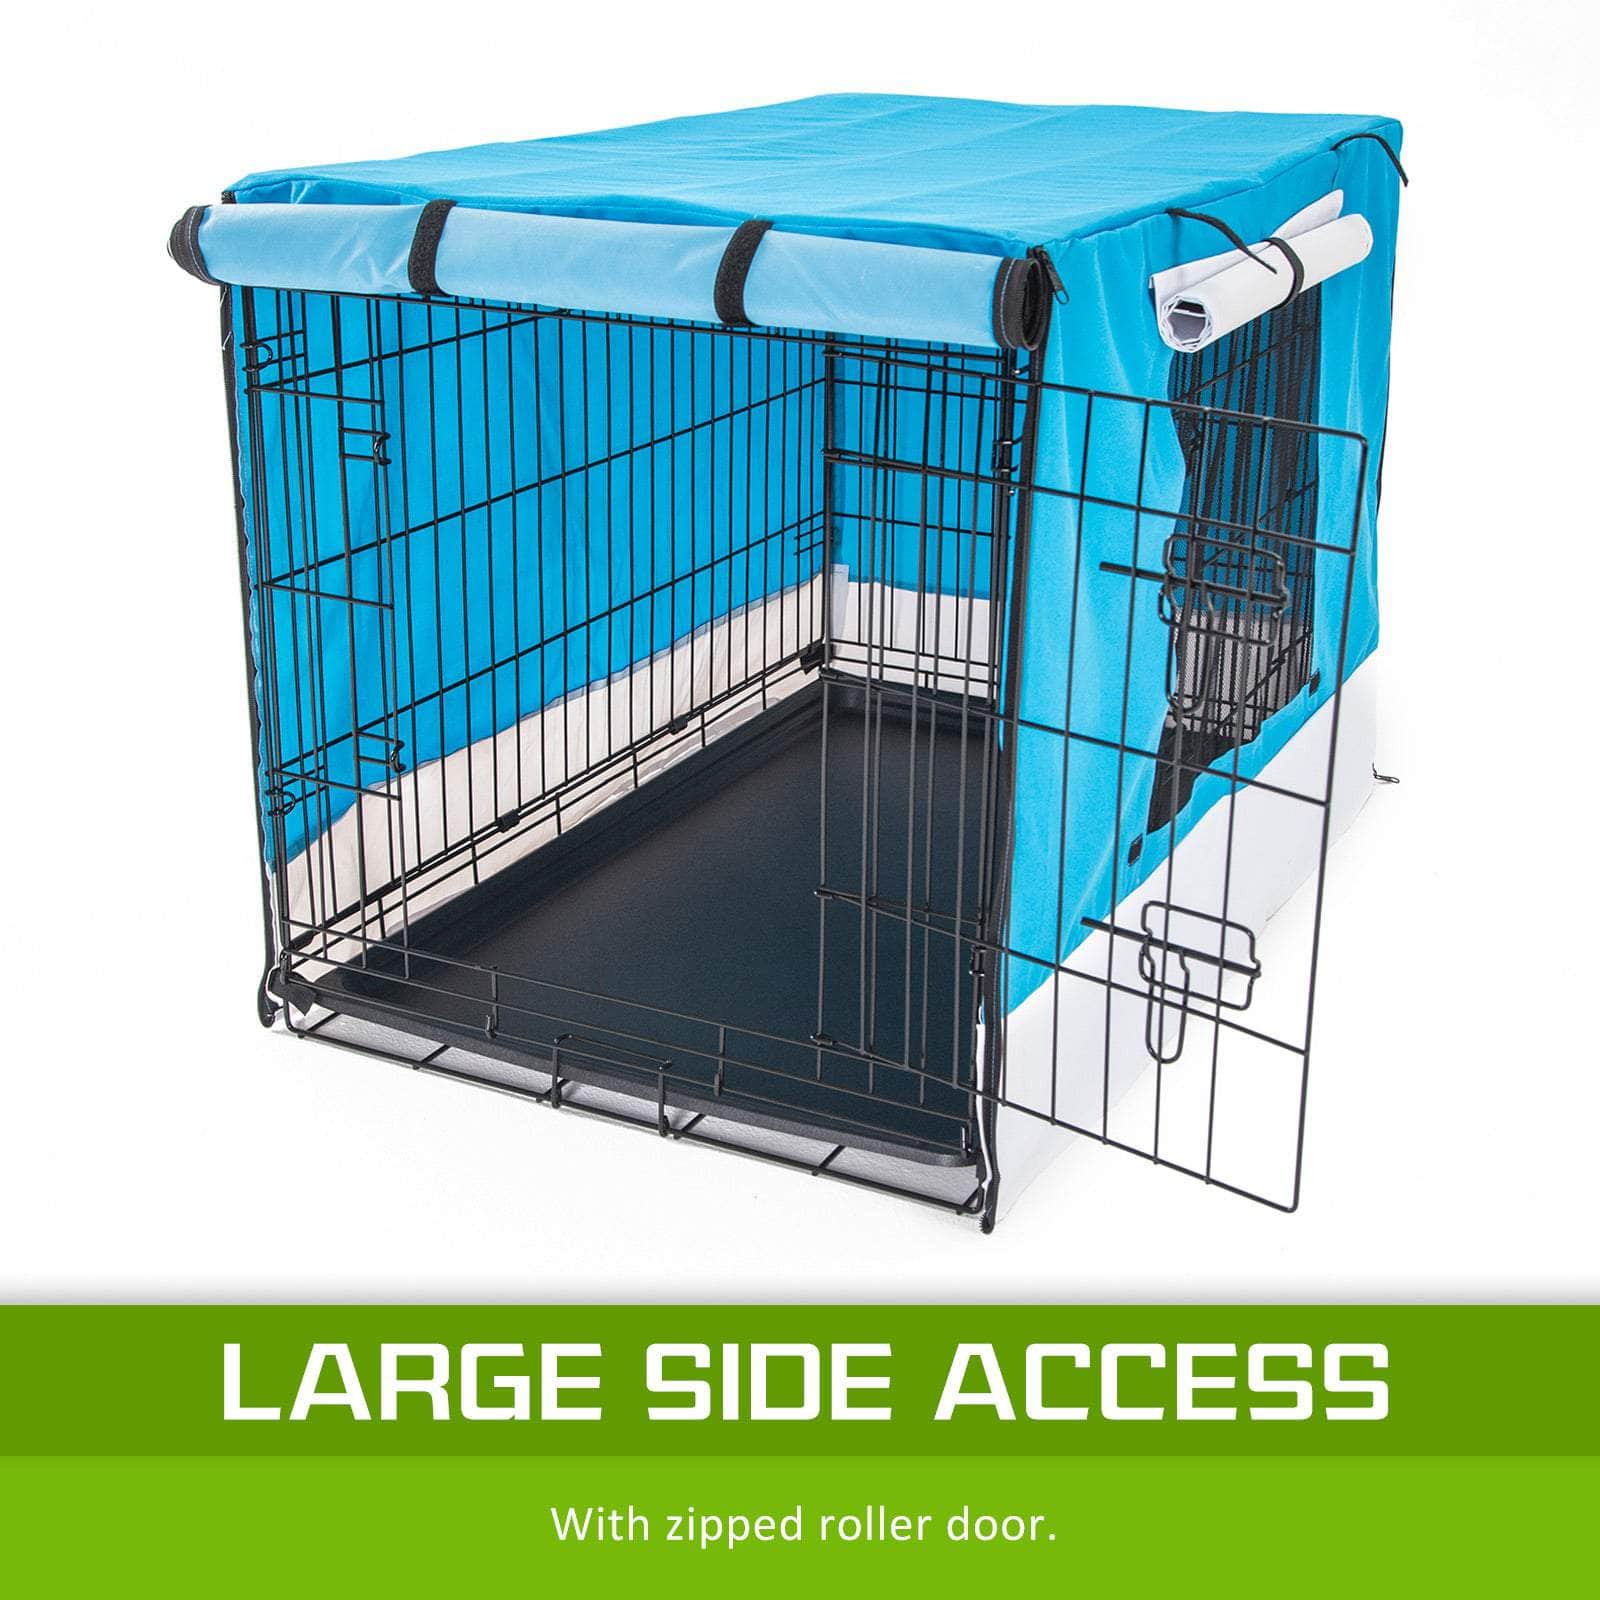 Blue Cage Cover Enclosure For Wire Dog Cage Crate 24/30/36/42/48inch